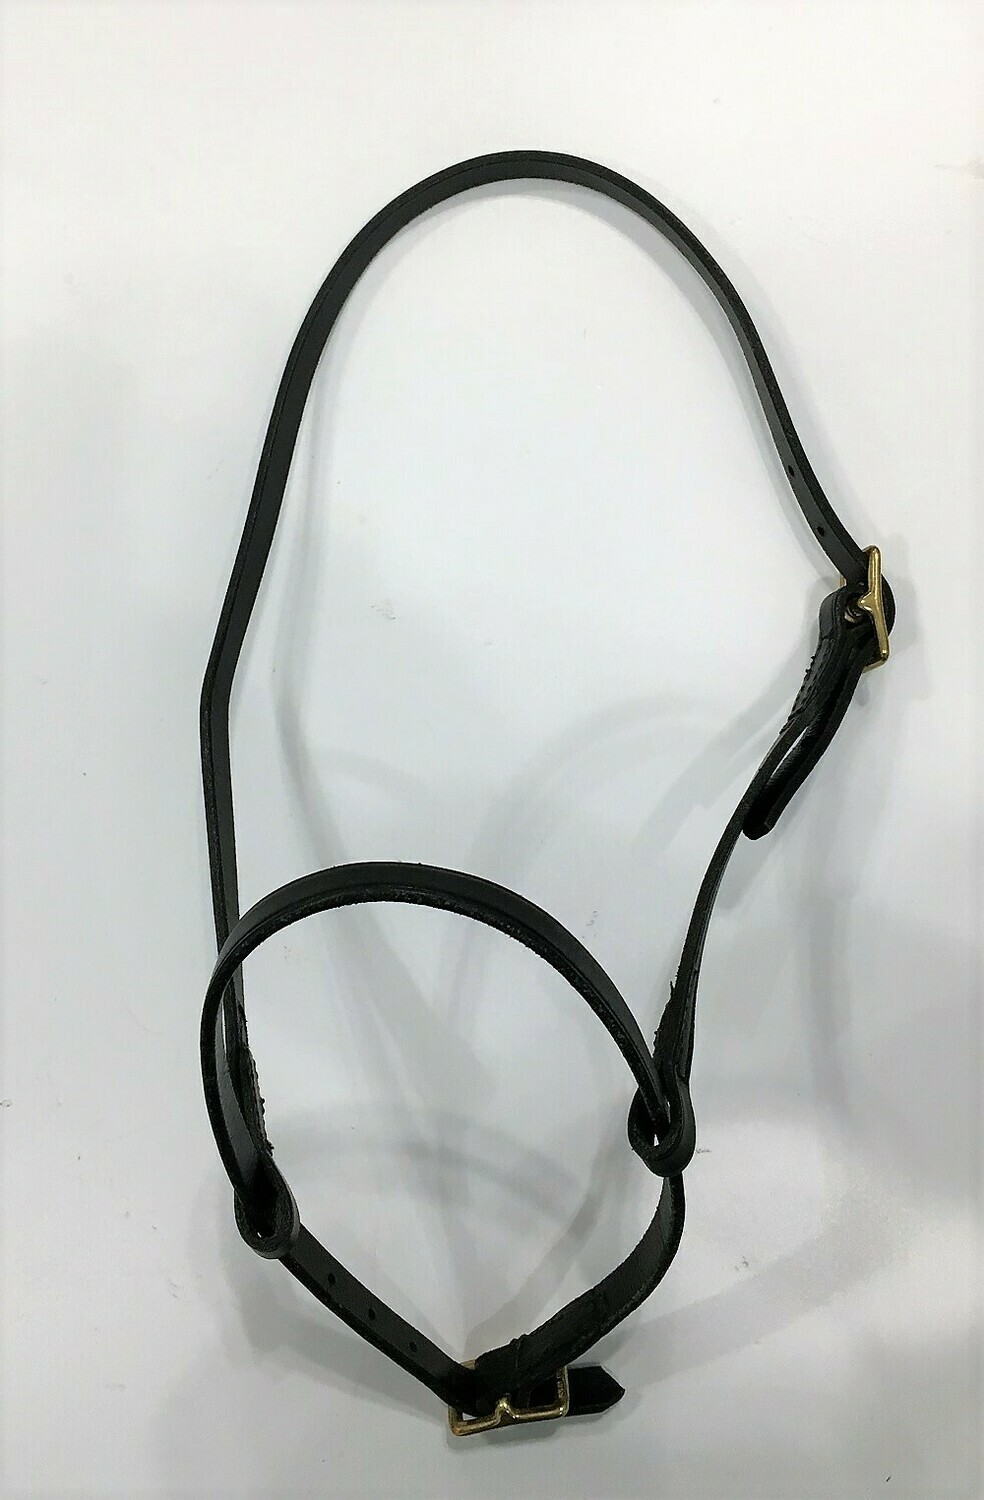 Leather Noseband - Cavesson style